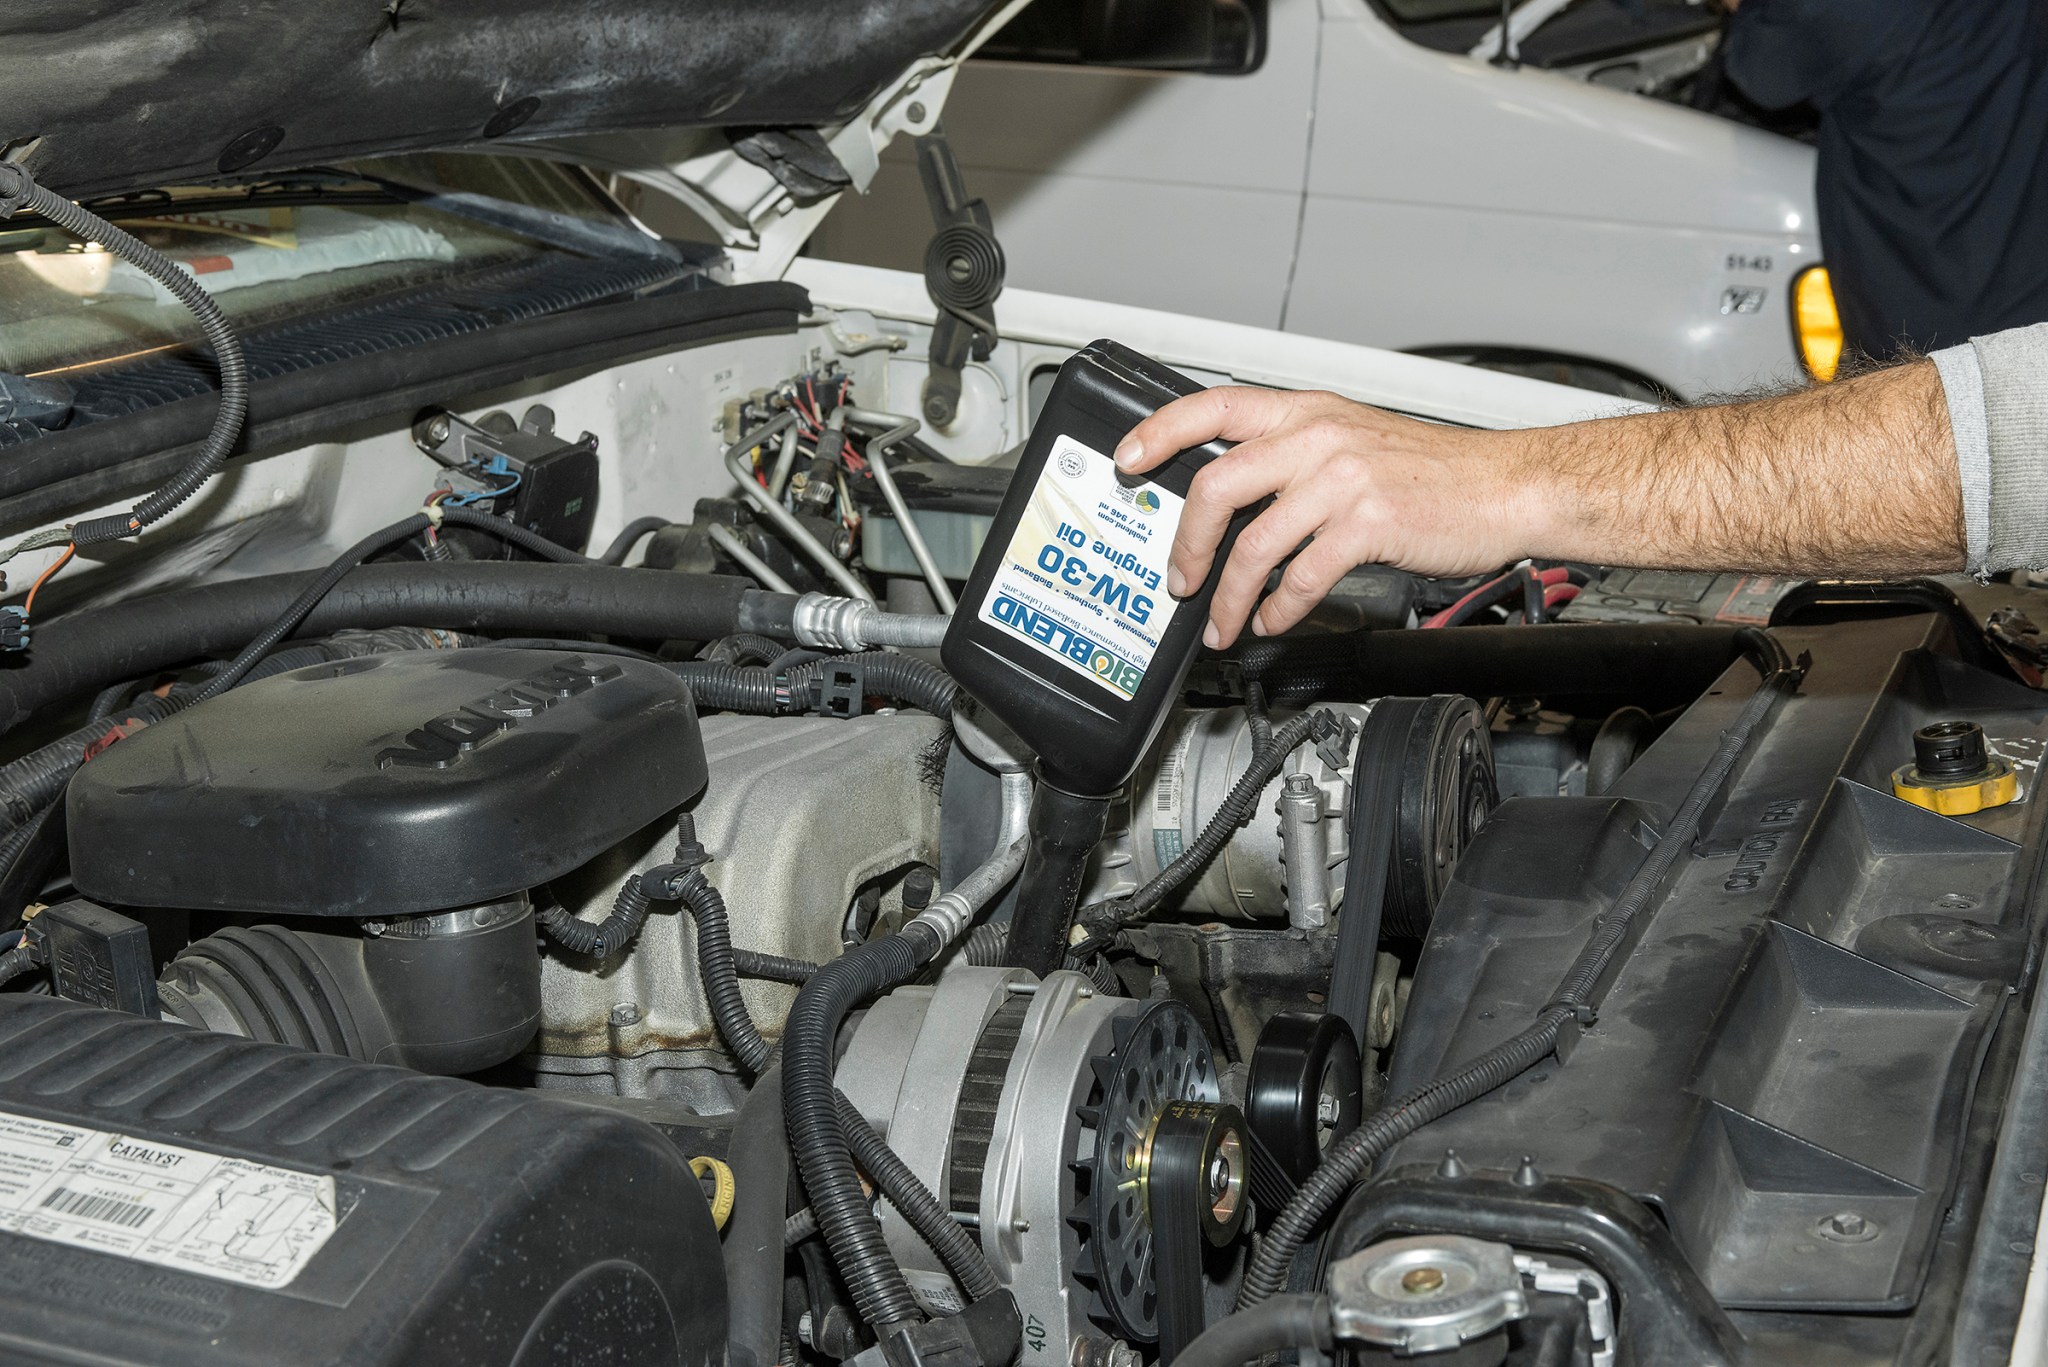 A new bio-based synthetic engine oil is added to an AFRC vehicle.